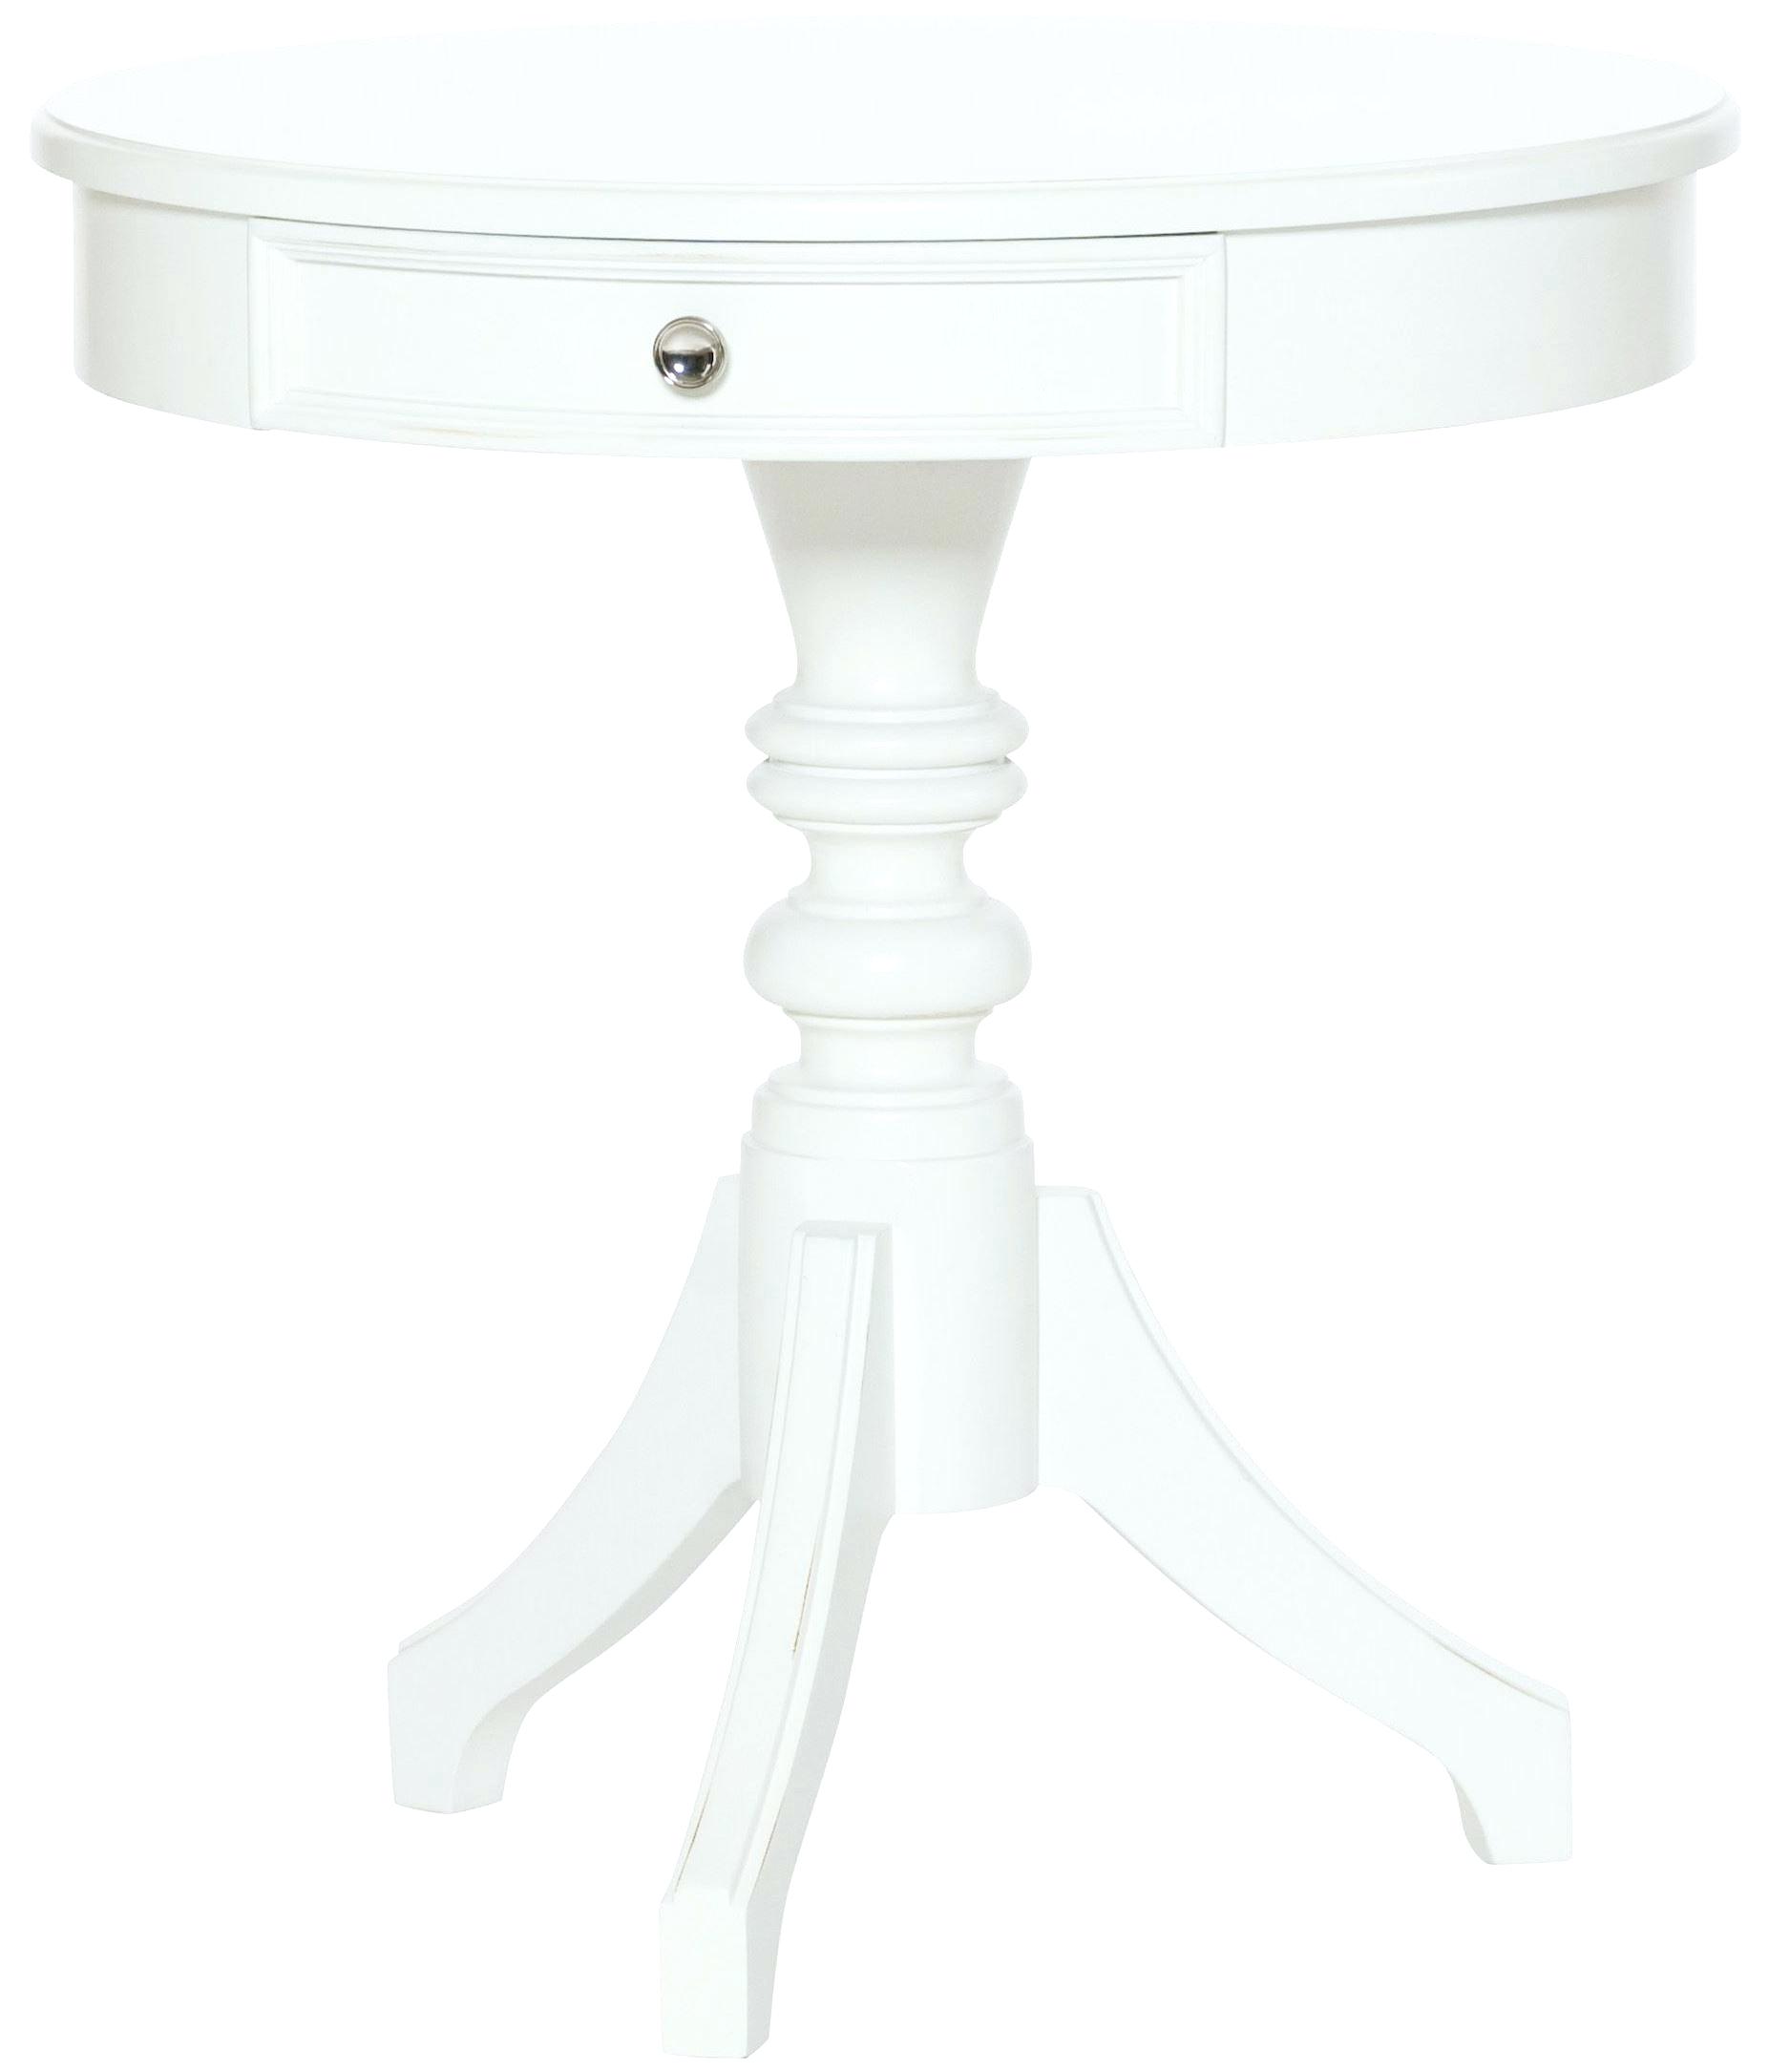 white round accent table tables whitewash small living room antique for inches high garage cabinets pier vases sofa end height clear crystal lamp gray trestle dining unique